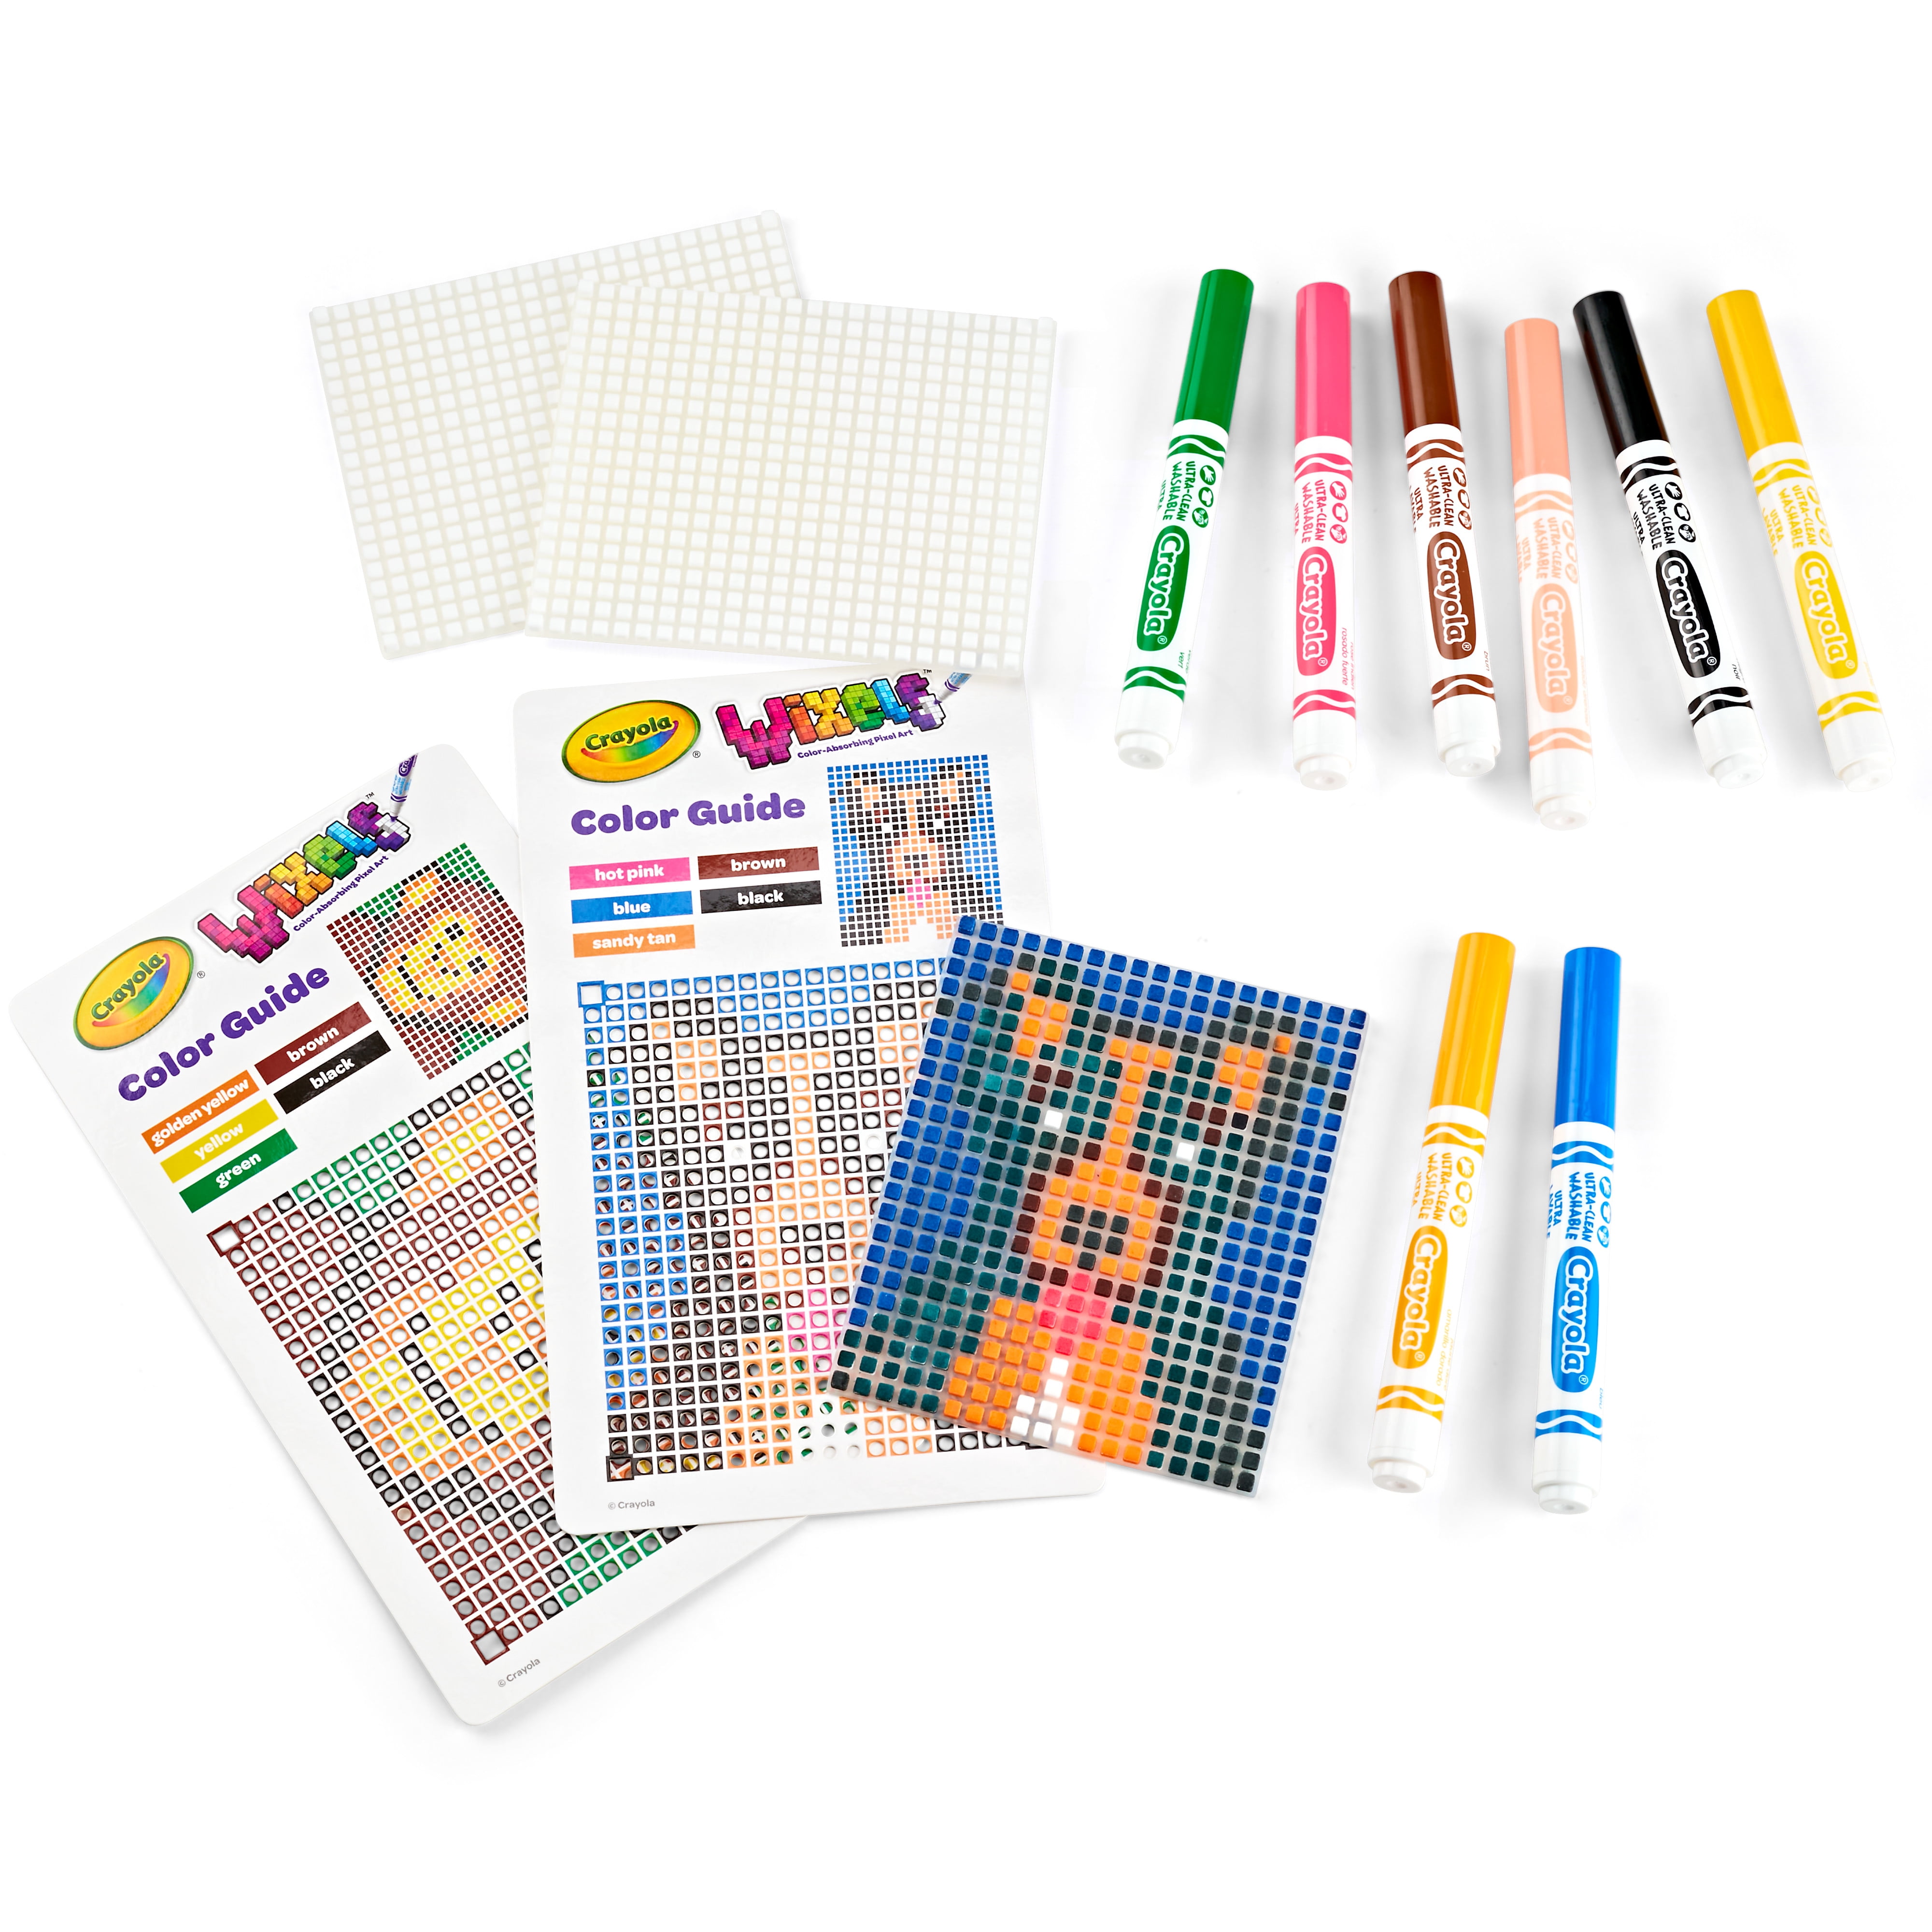 Top Gifts for Winter 2023 - Crayola Wixels Activity Sets